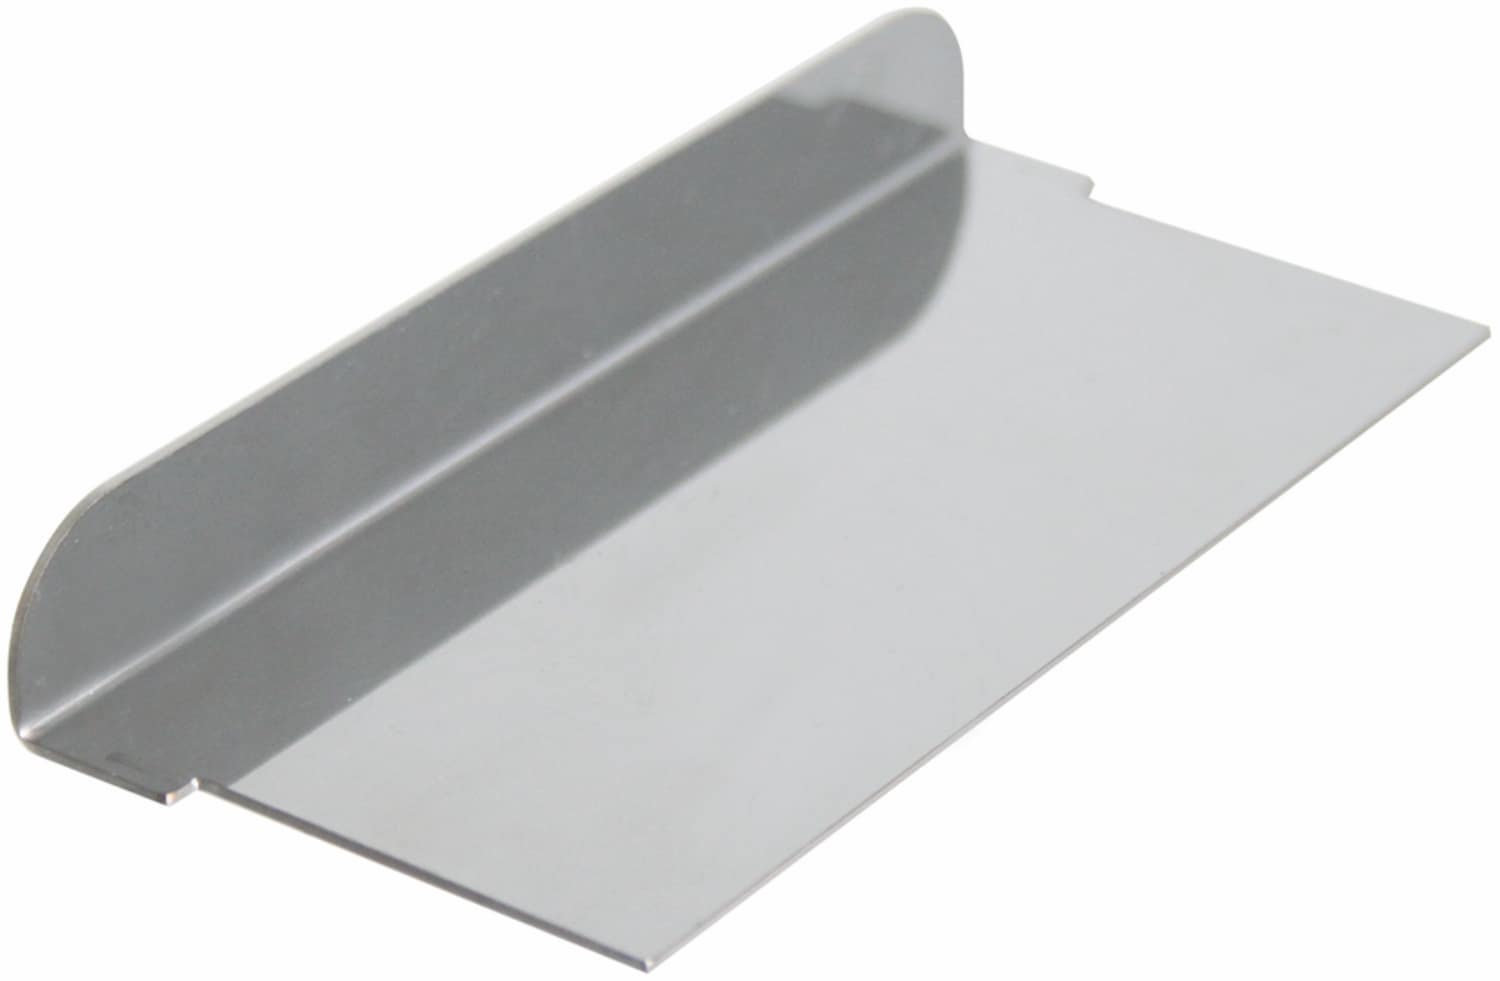 Replacement joint bars for cake display sheets stainless steel